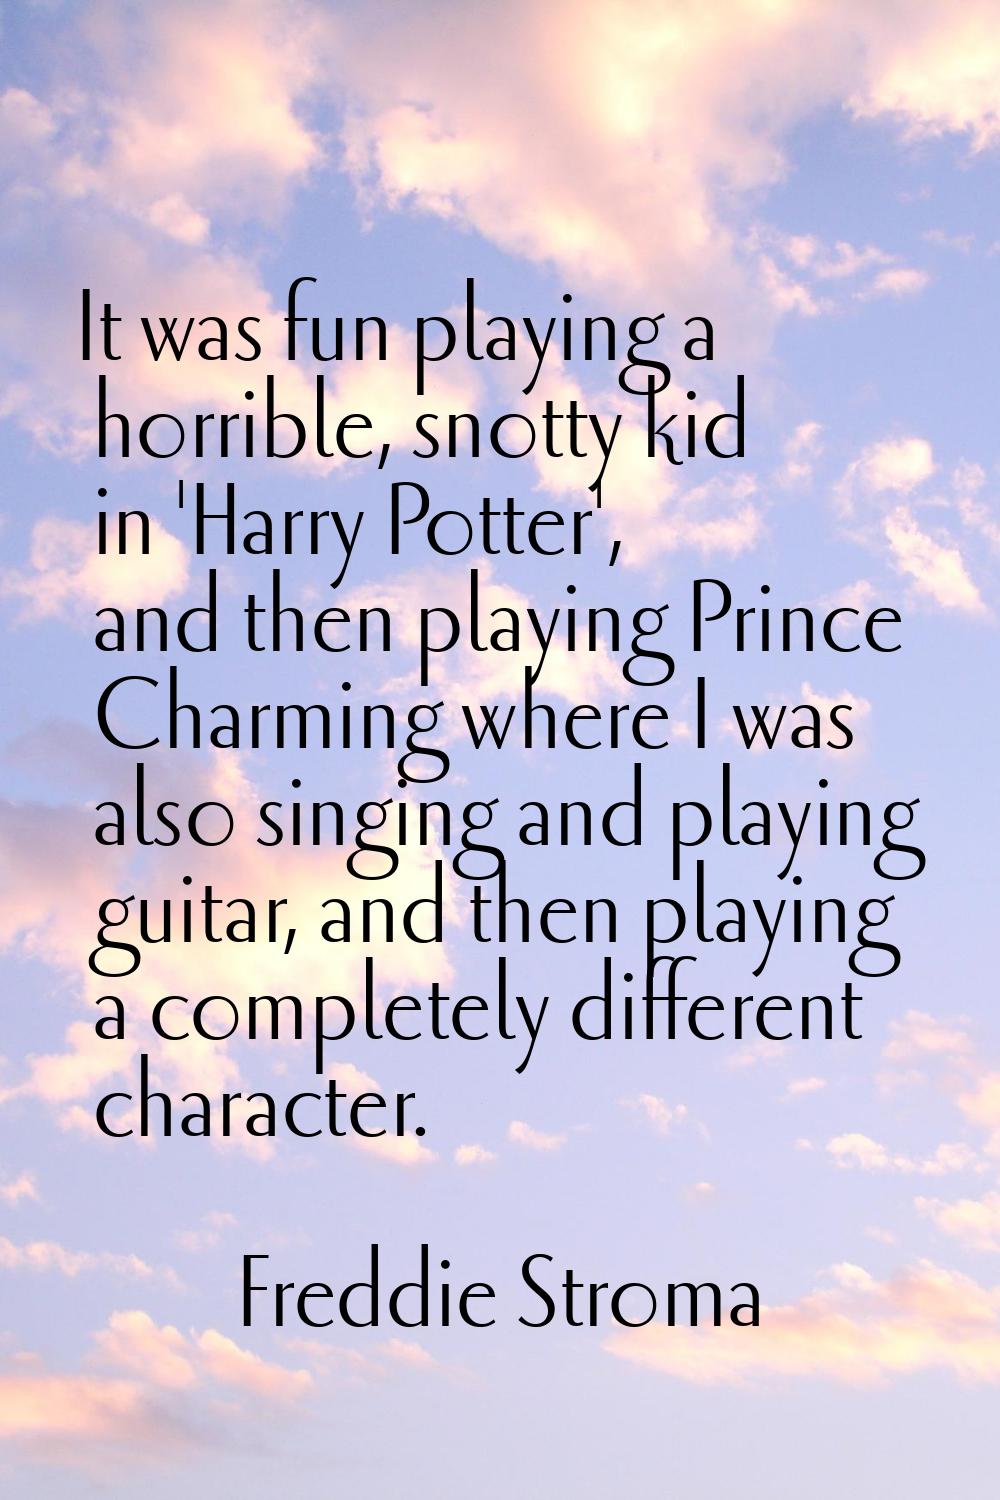 It was fun playing a horrible, snotty kid in 'Harry Potter', and then playing Prince Charming where